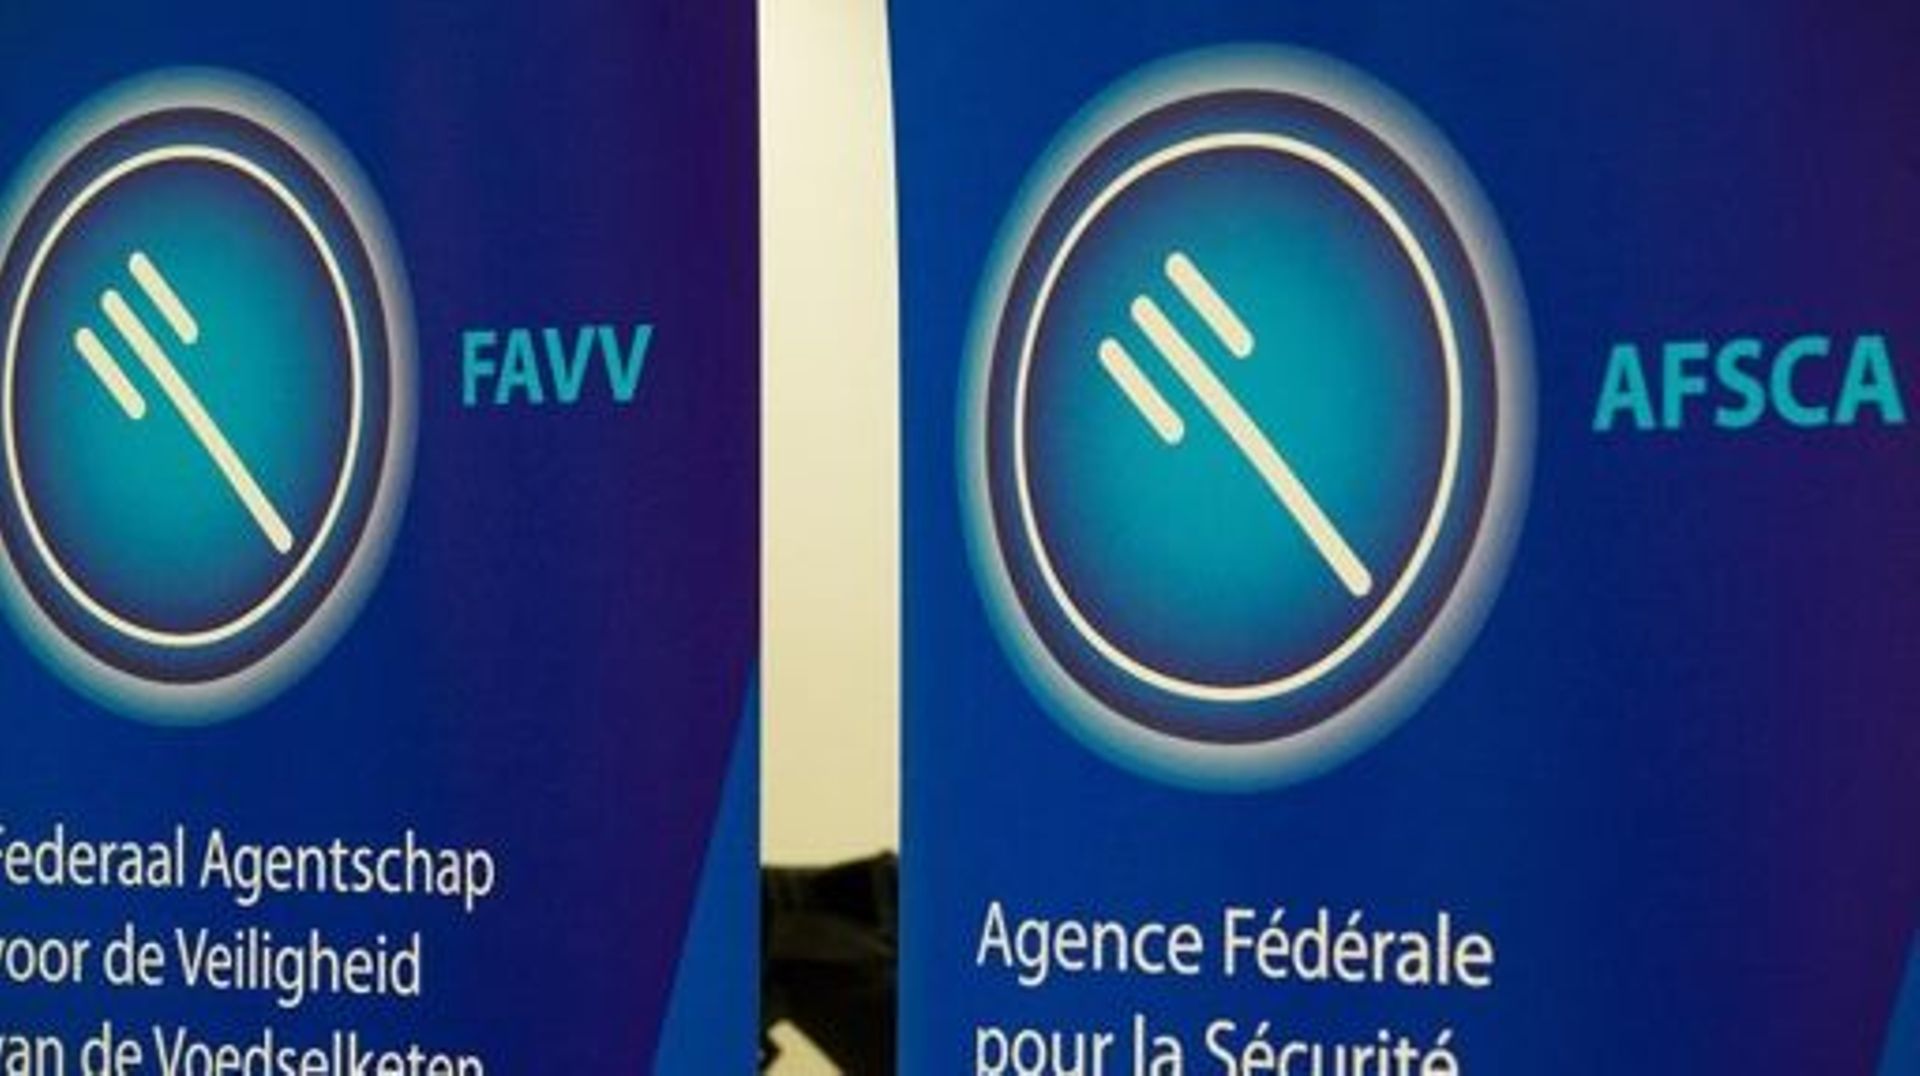 FASFC - FAVV - AFSCA logo pictured during a press conference of the Federal Agency for the Safety of the Food Chain (FASFC - FAVV - AFSCA) to present the year results, Friday 03 July 2020 in Brussels. BELGA PHOTO NICOLAS MAETERLINCK